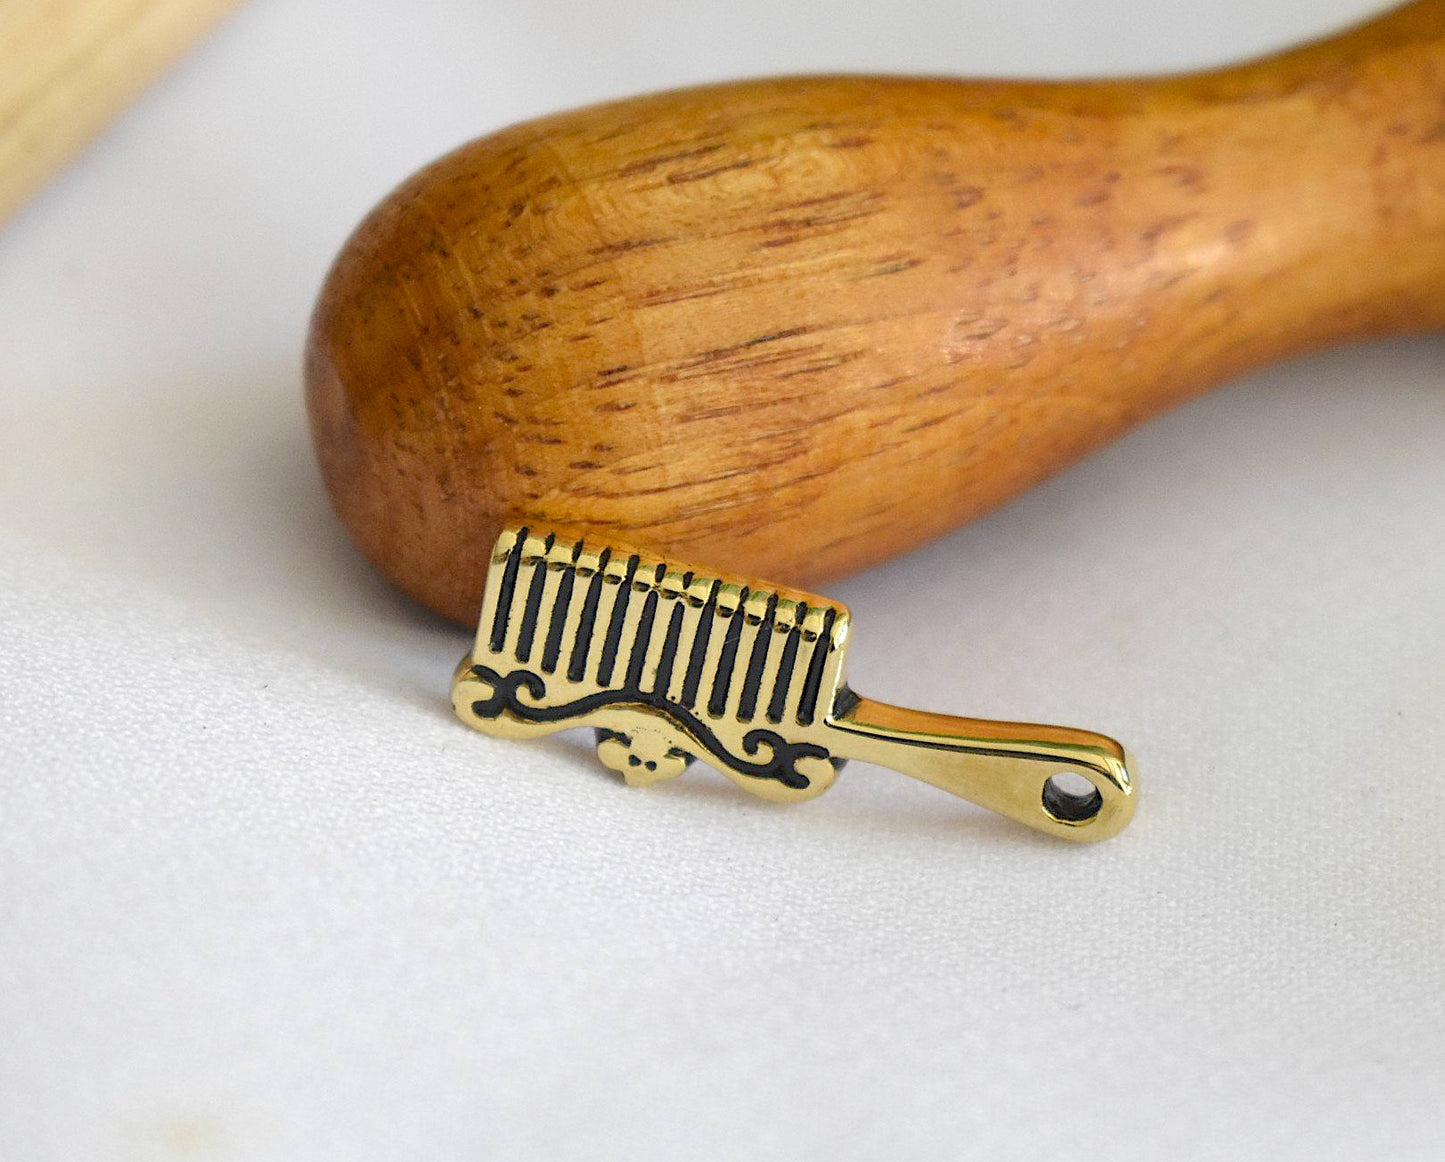 Cute Golden Comb Brush Gold Brass Charm Necklace Pendant Jewelry